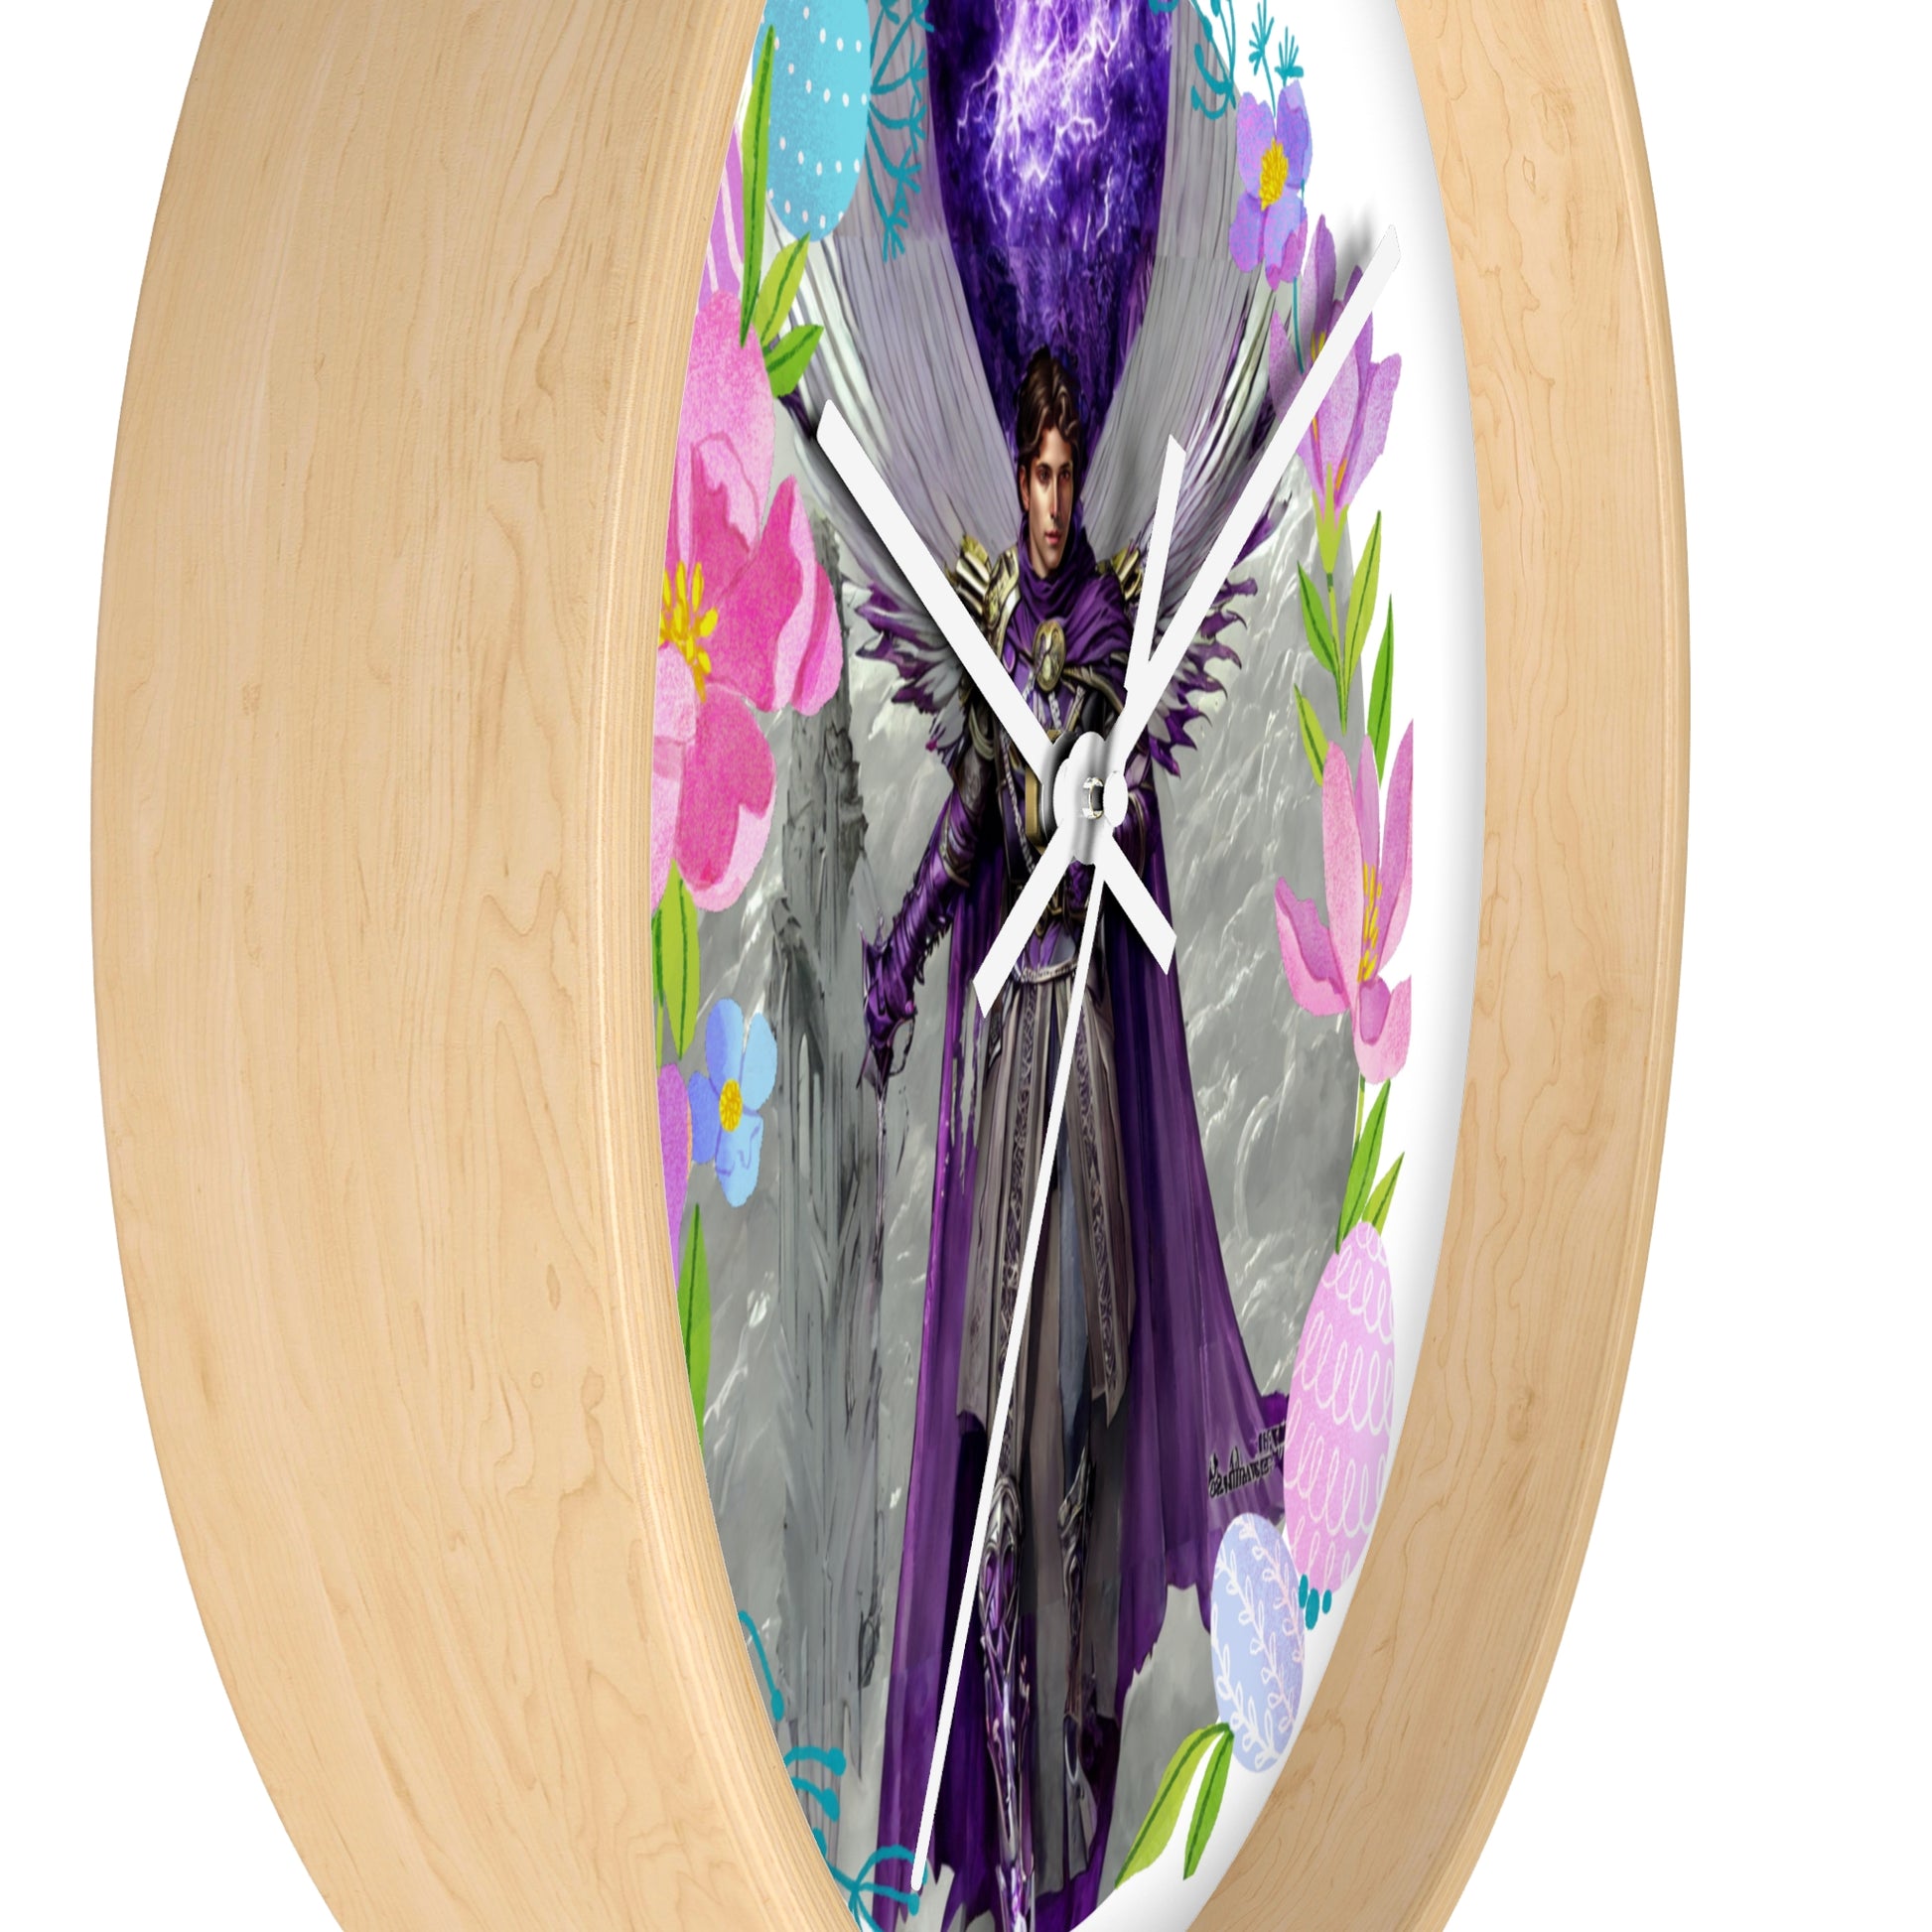 Archangel Gabriel Wall Clock - Angelic Thrones: Your Gateway to the Angelic Realms